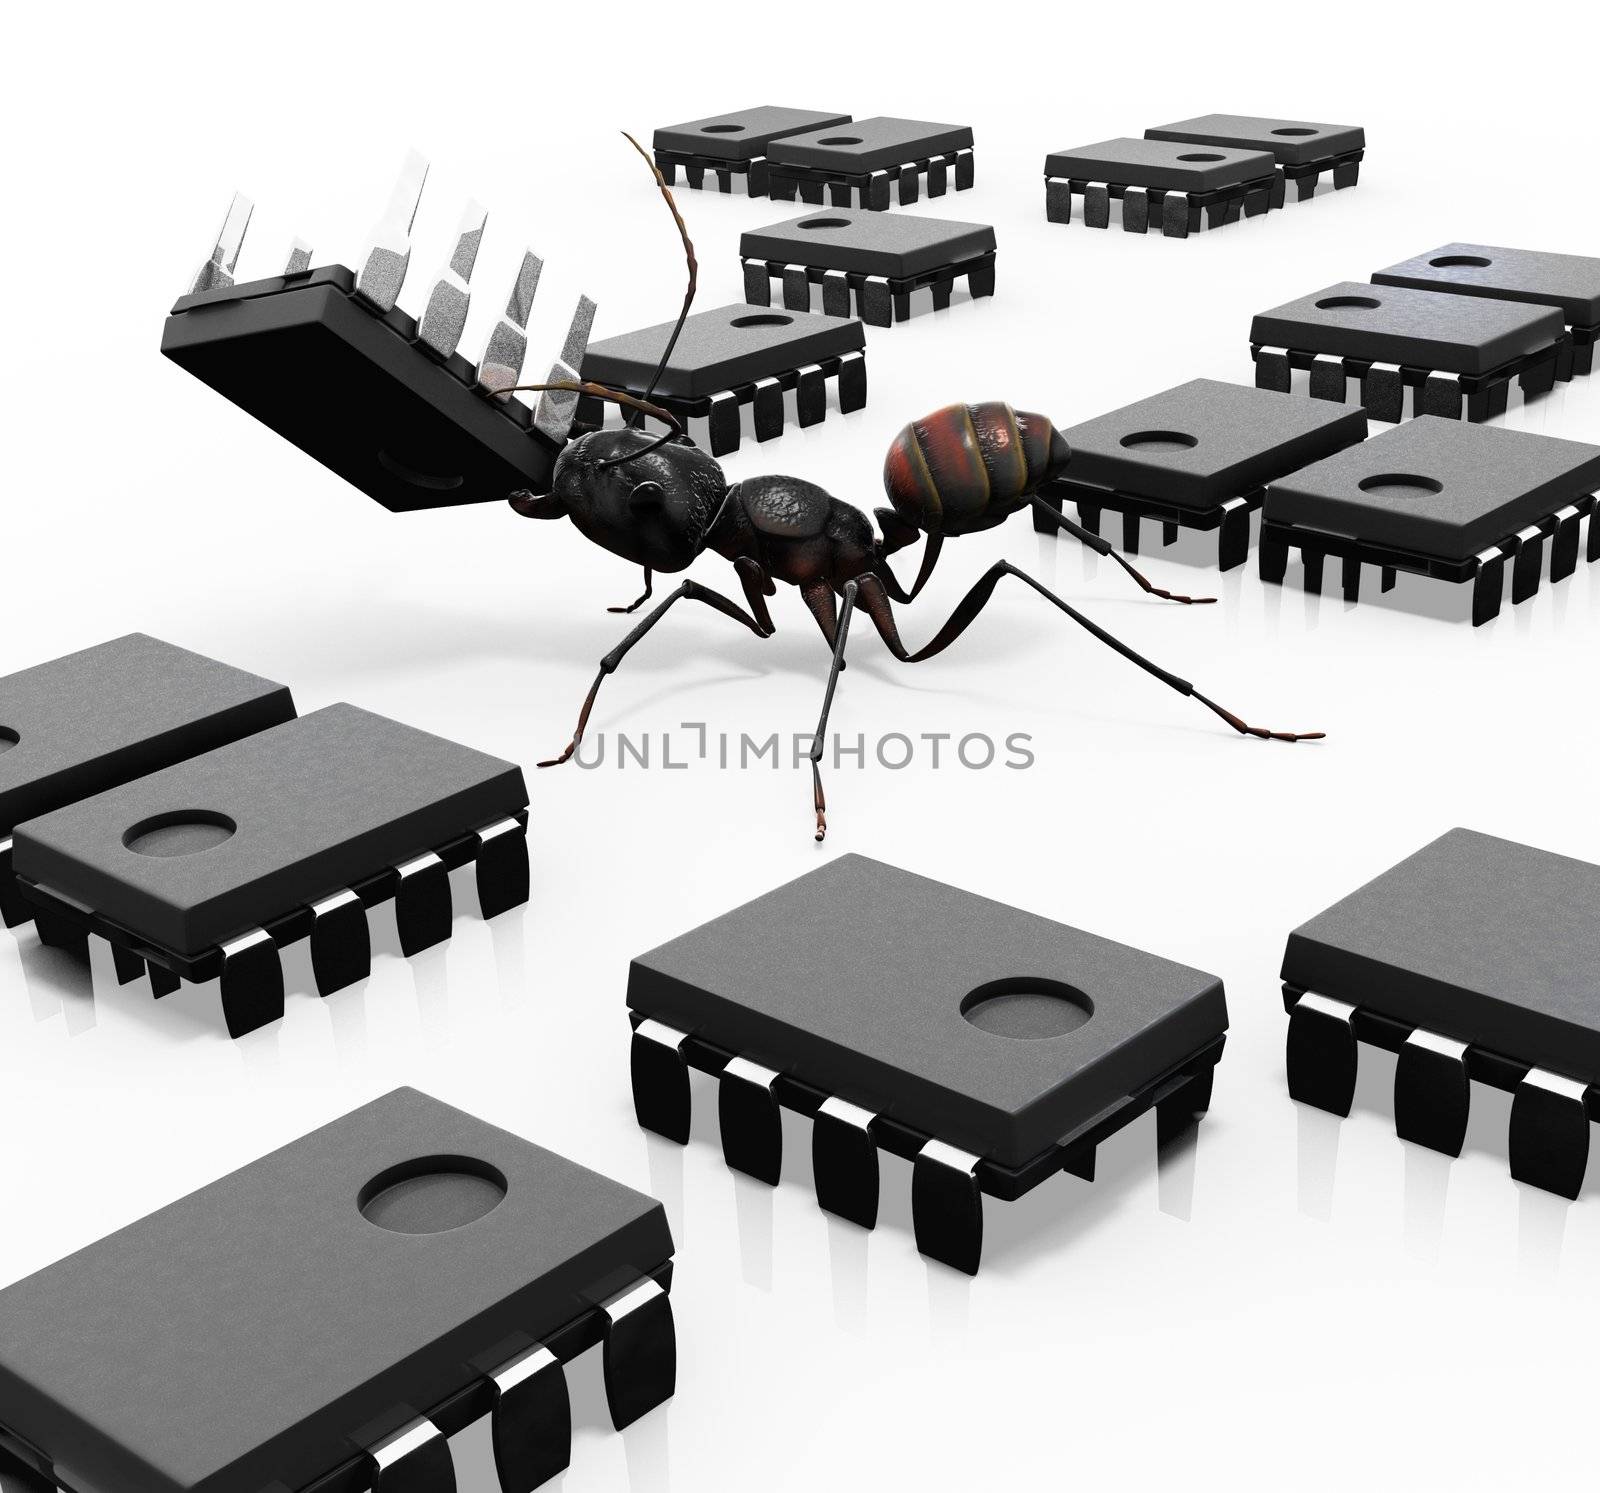 Ant Organizing Microchips by LeoBlanchette